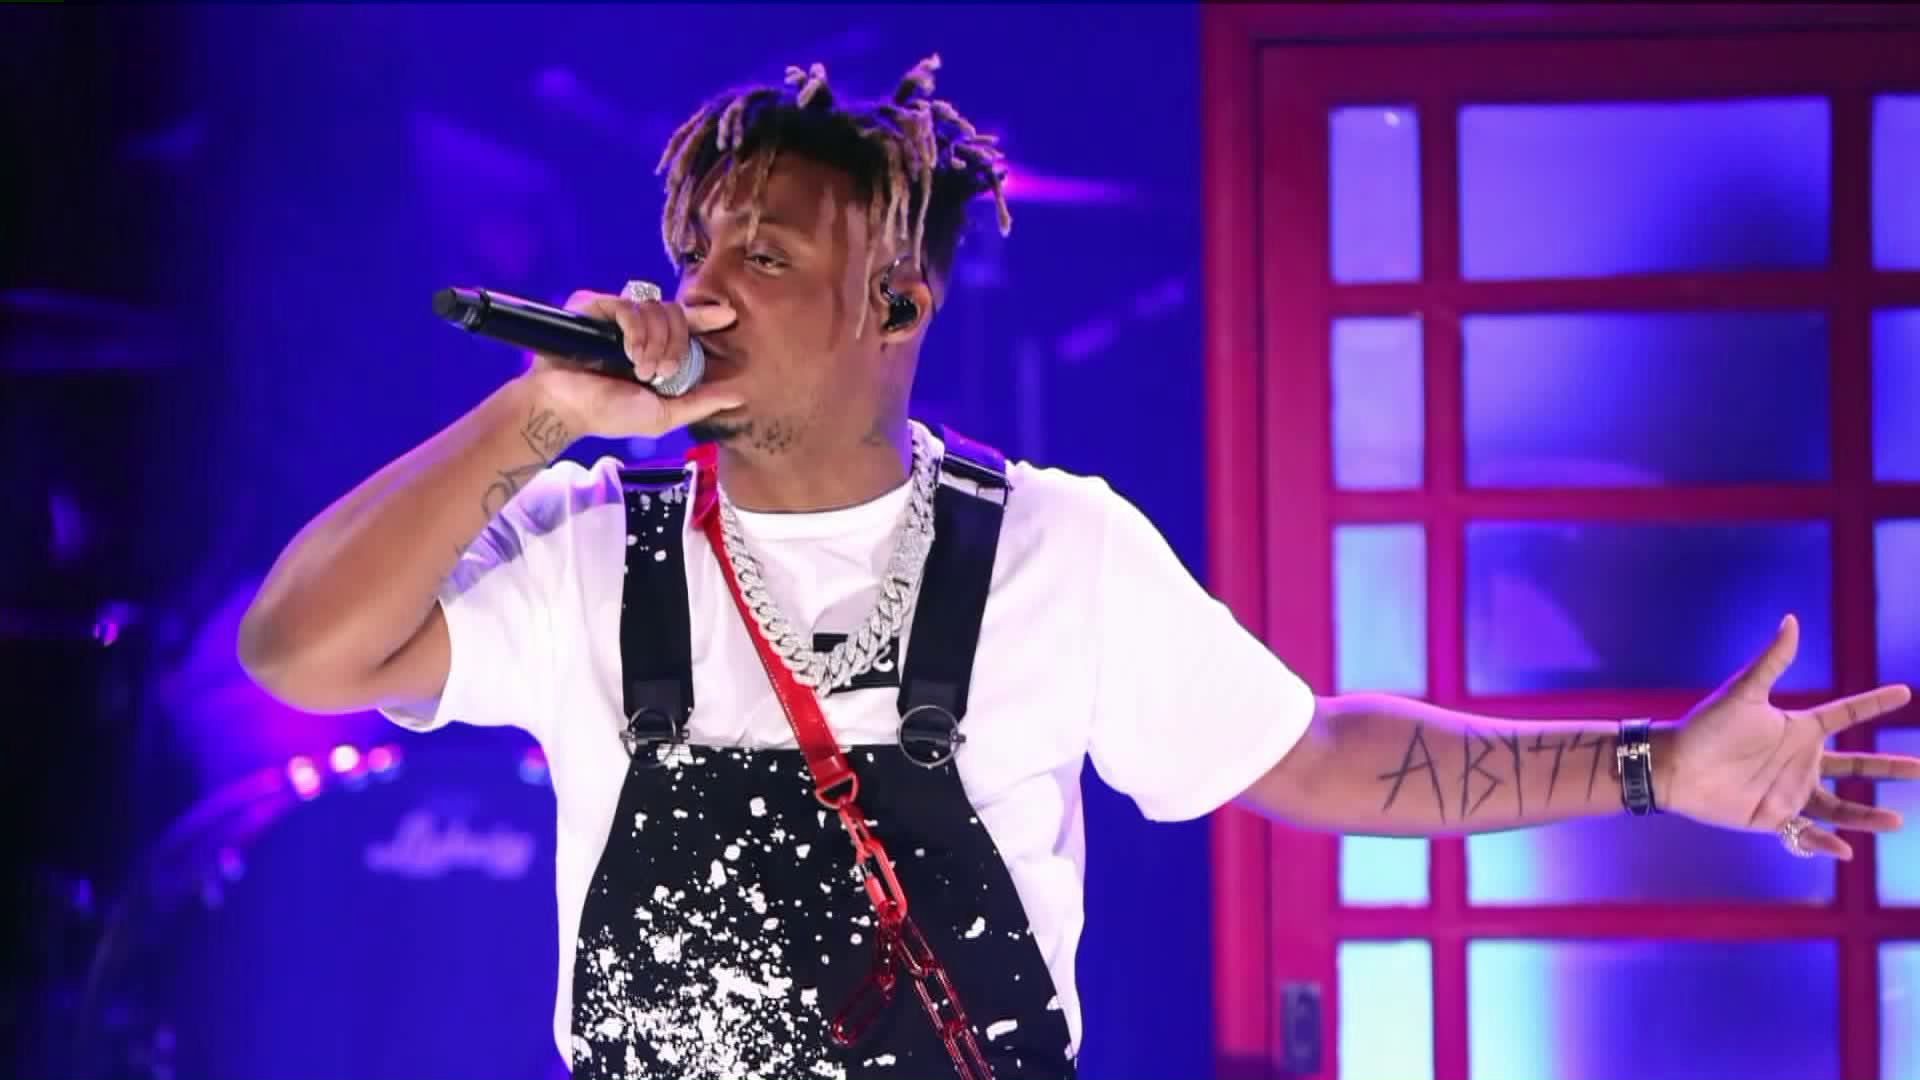 Reports: Chicago rapper Juice WRLD dies after suffering seizure at Midway Airport